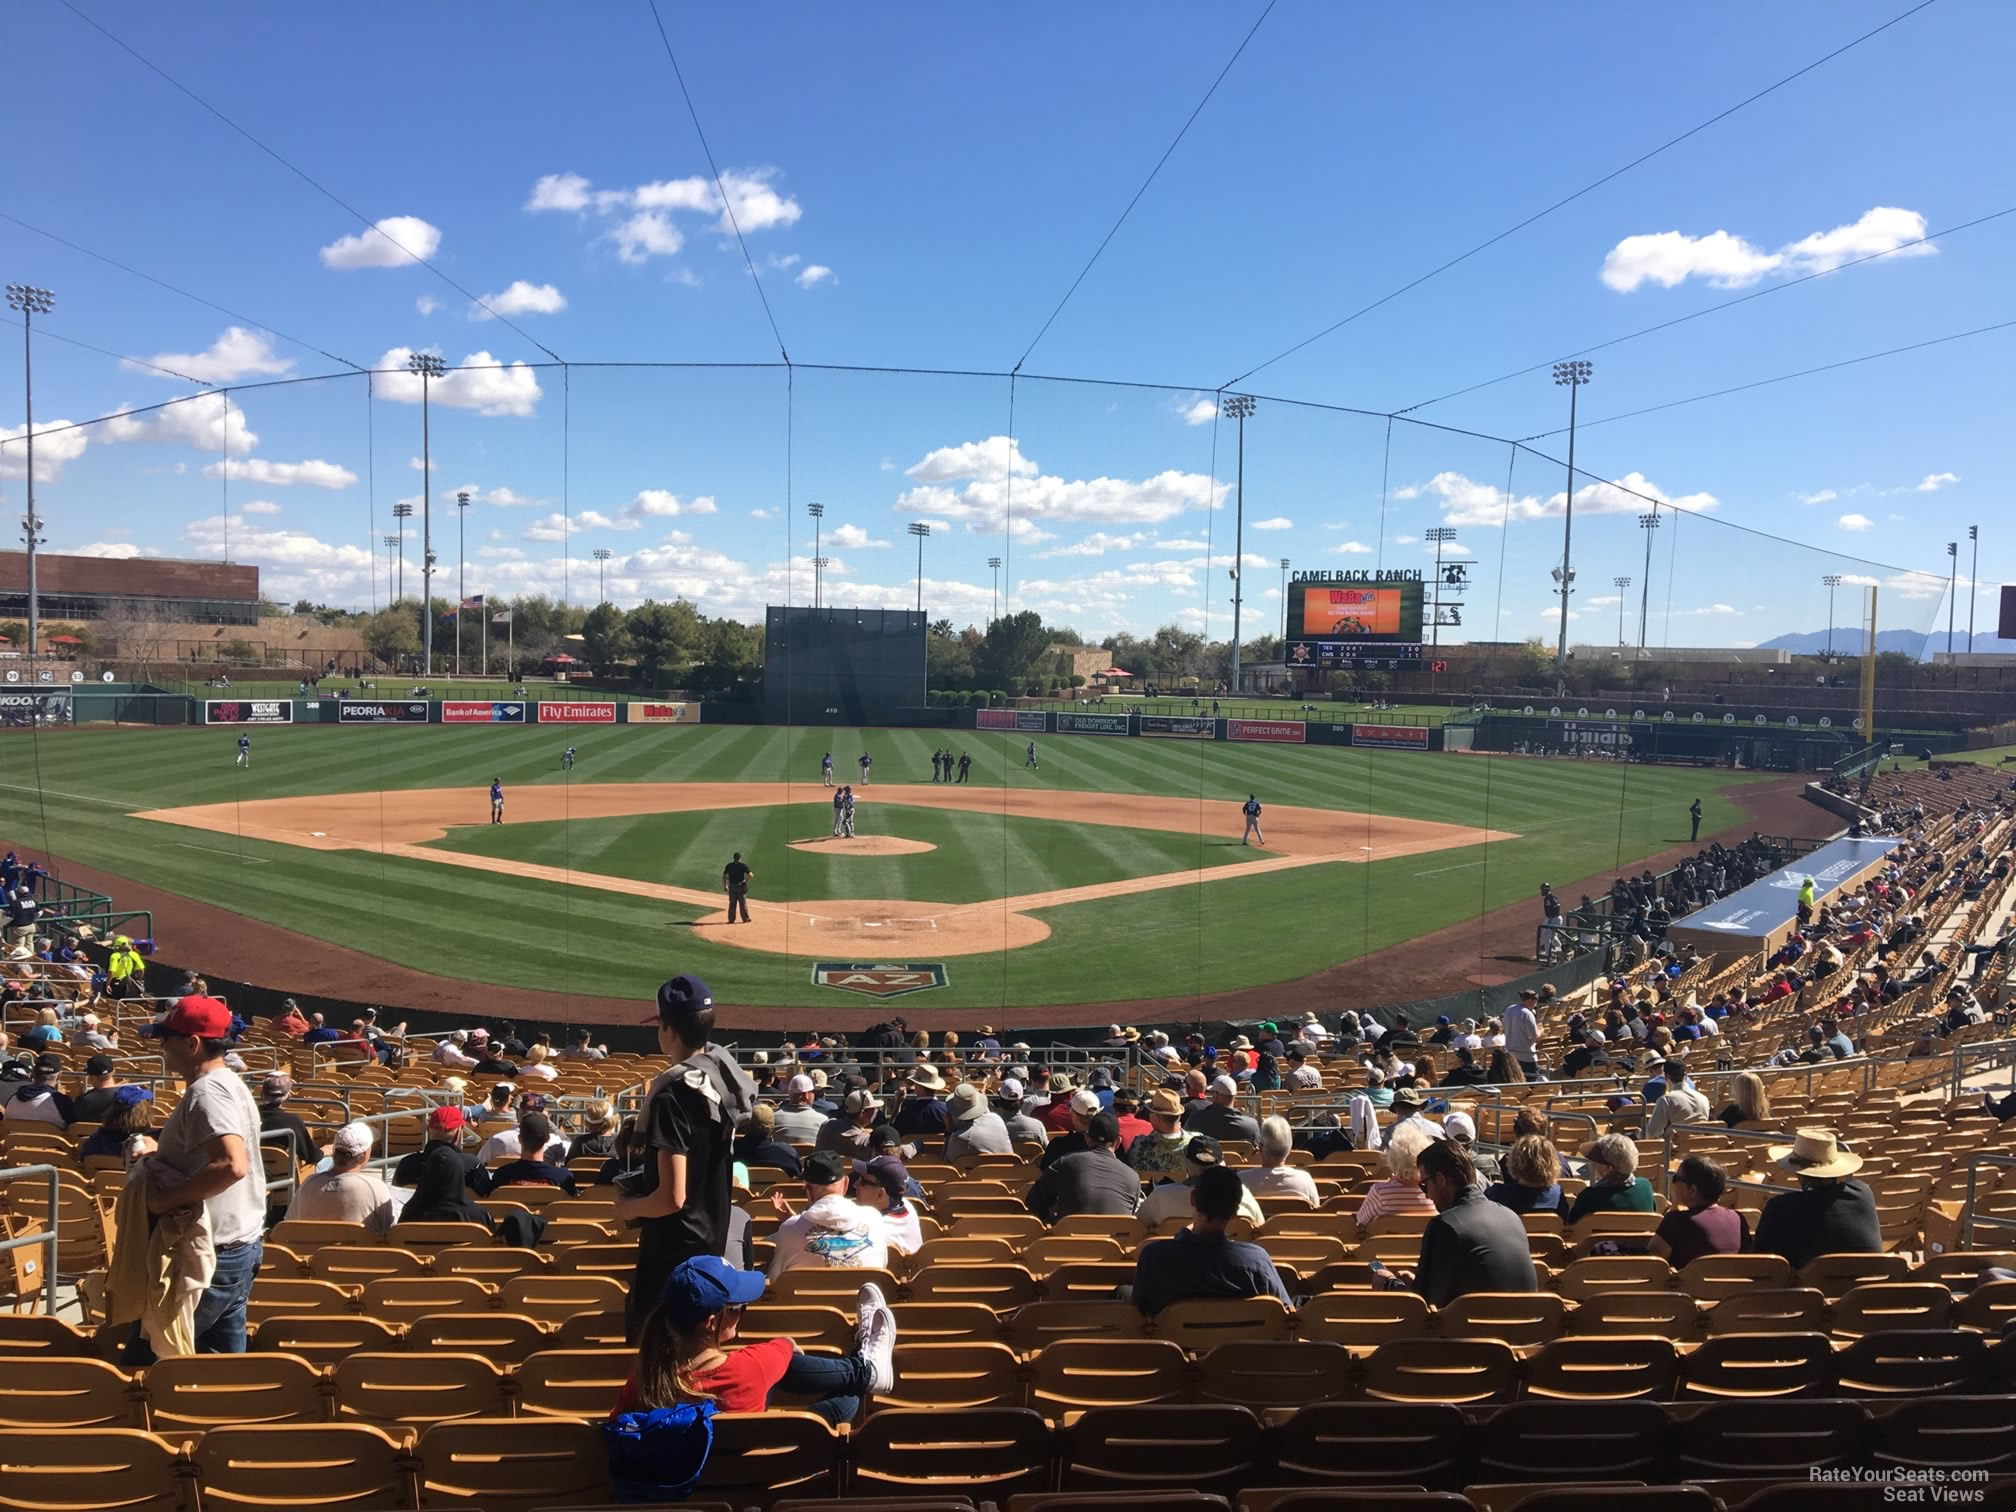 section 115, row 18 seat view  - camelback ranch